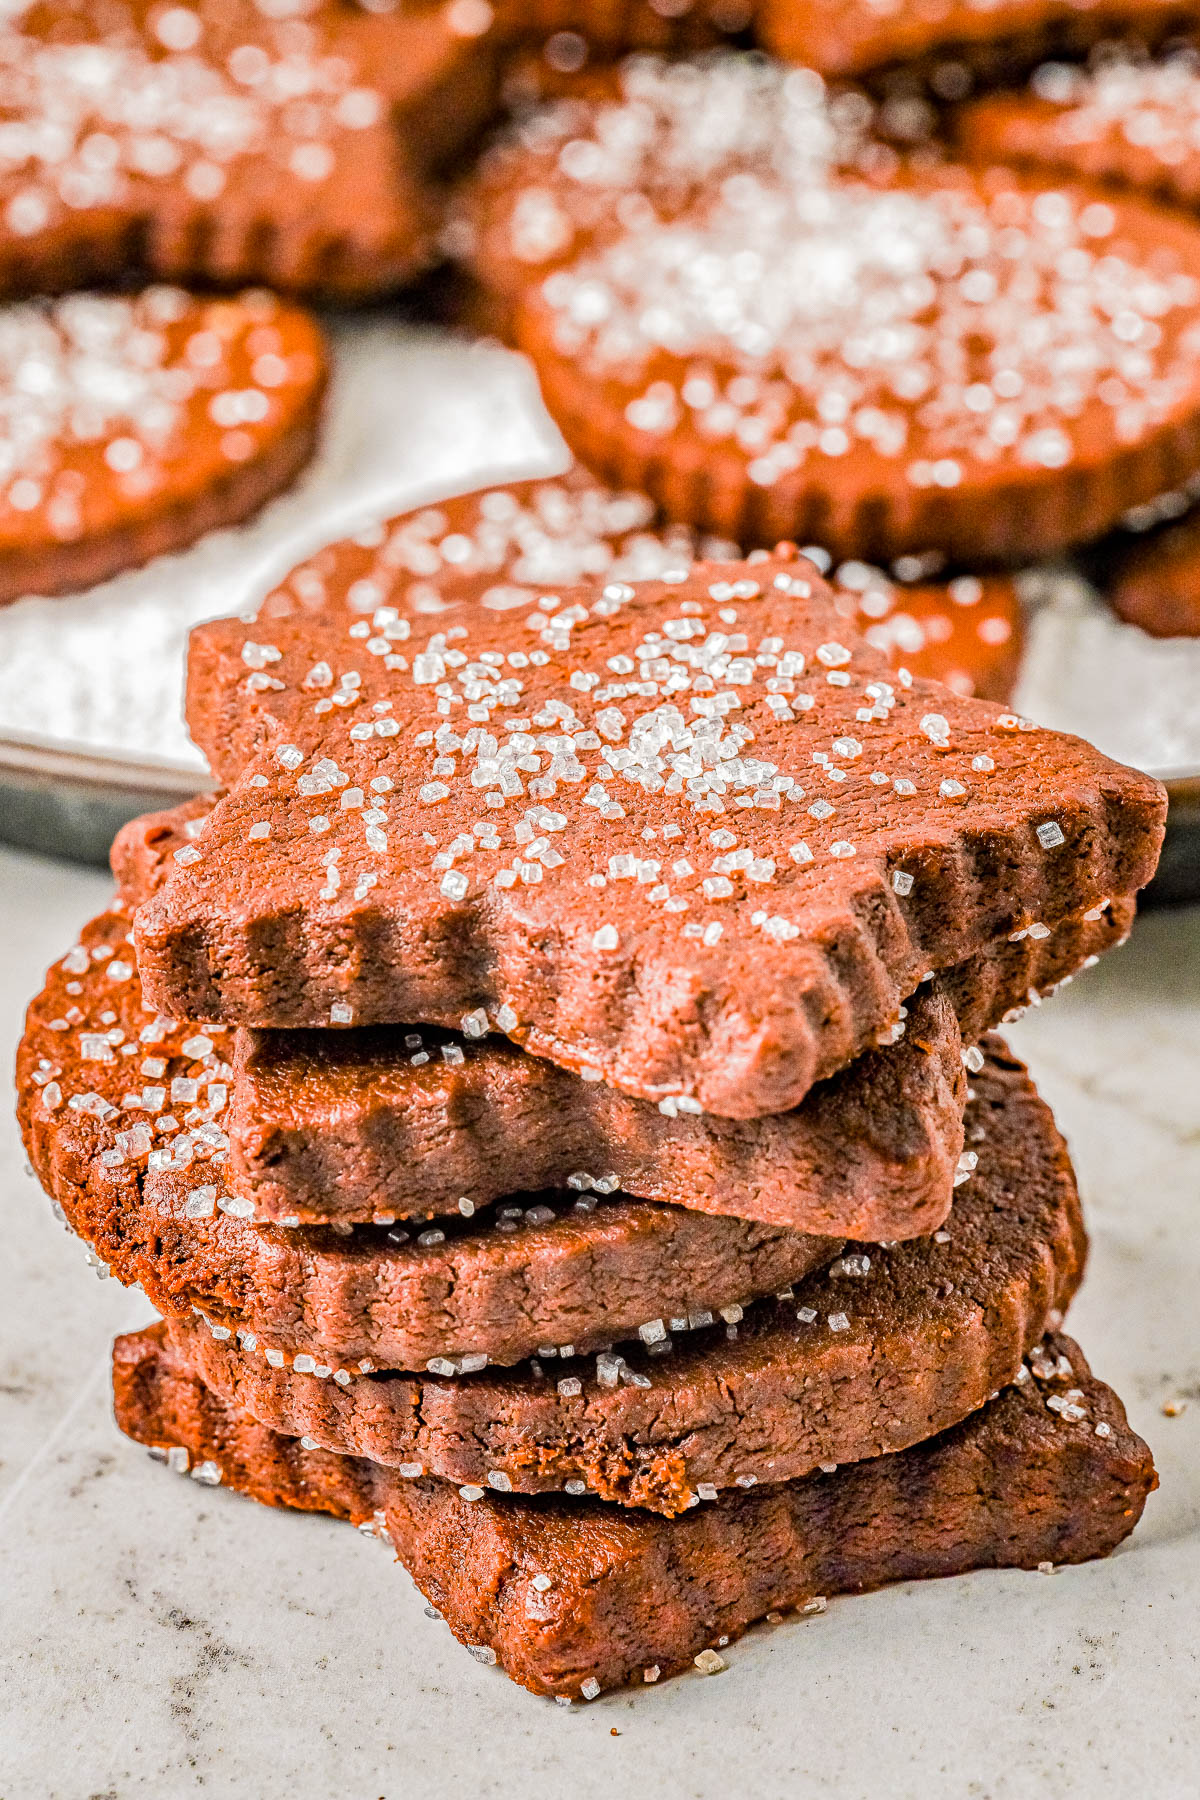 Mexican Chocolate Shortbread Cookies - These buttery shortbread cookies are full of chocolate, cinnamon-and-sugar, and a bit of spice thanks to a couple unique ingredients! They remind me of a good cup of Mexican hot chocolate, in cookie form. Great for cookie exchanges because they keep well and the perfect conversation piece cookie to set out at your next holiday party or fiesta! 